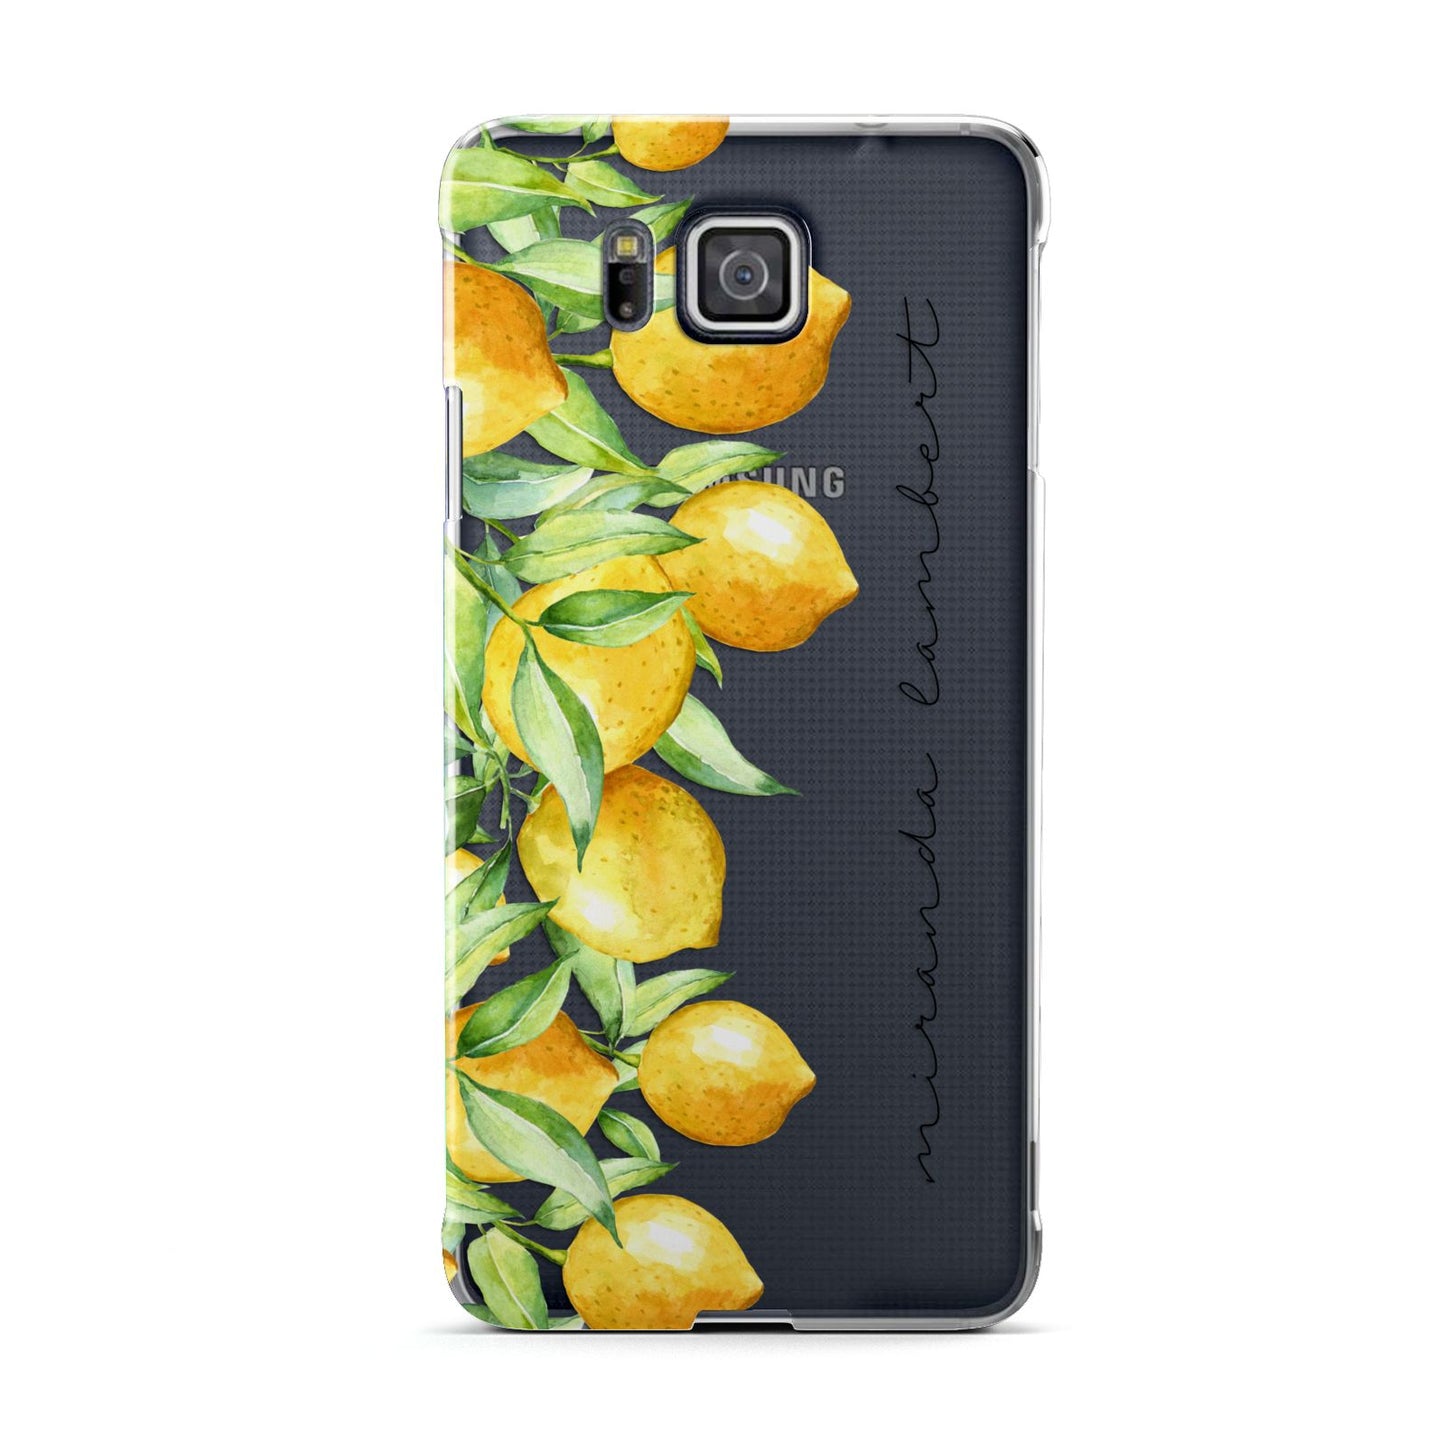 Personalised Lemon Bunches Samsung Galaxy Alpha Case